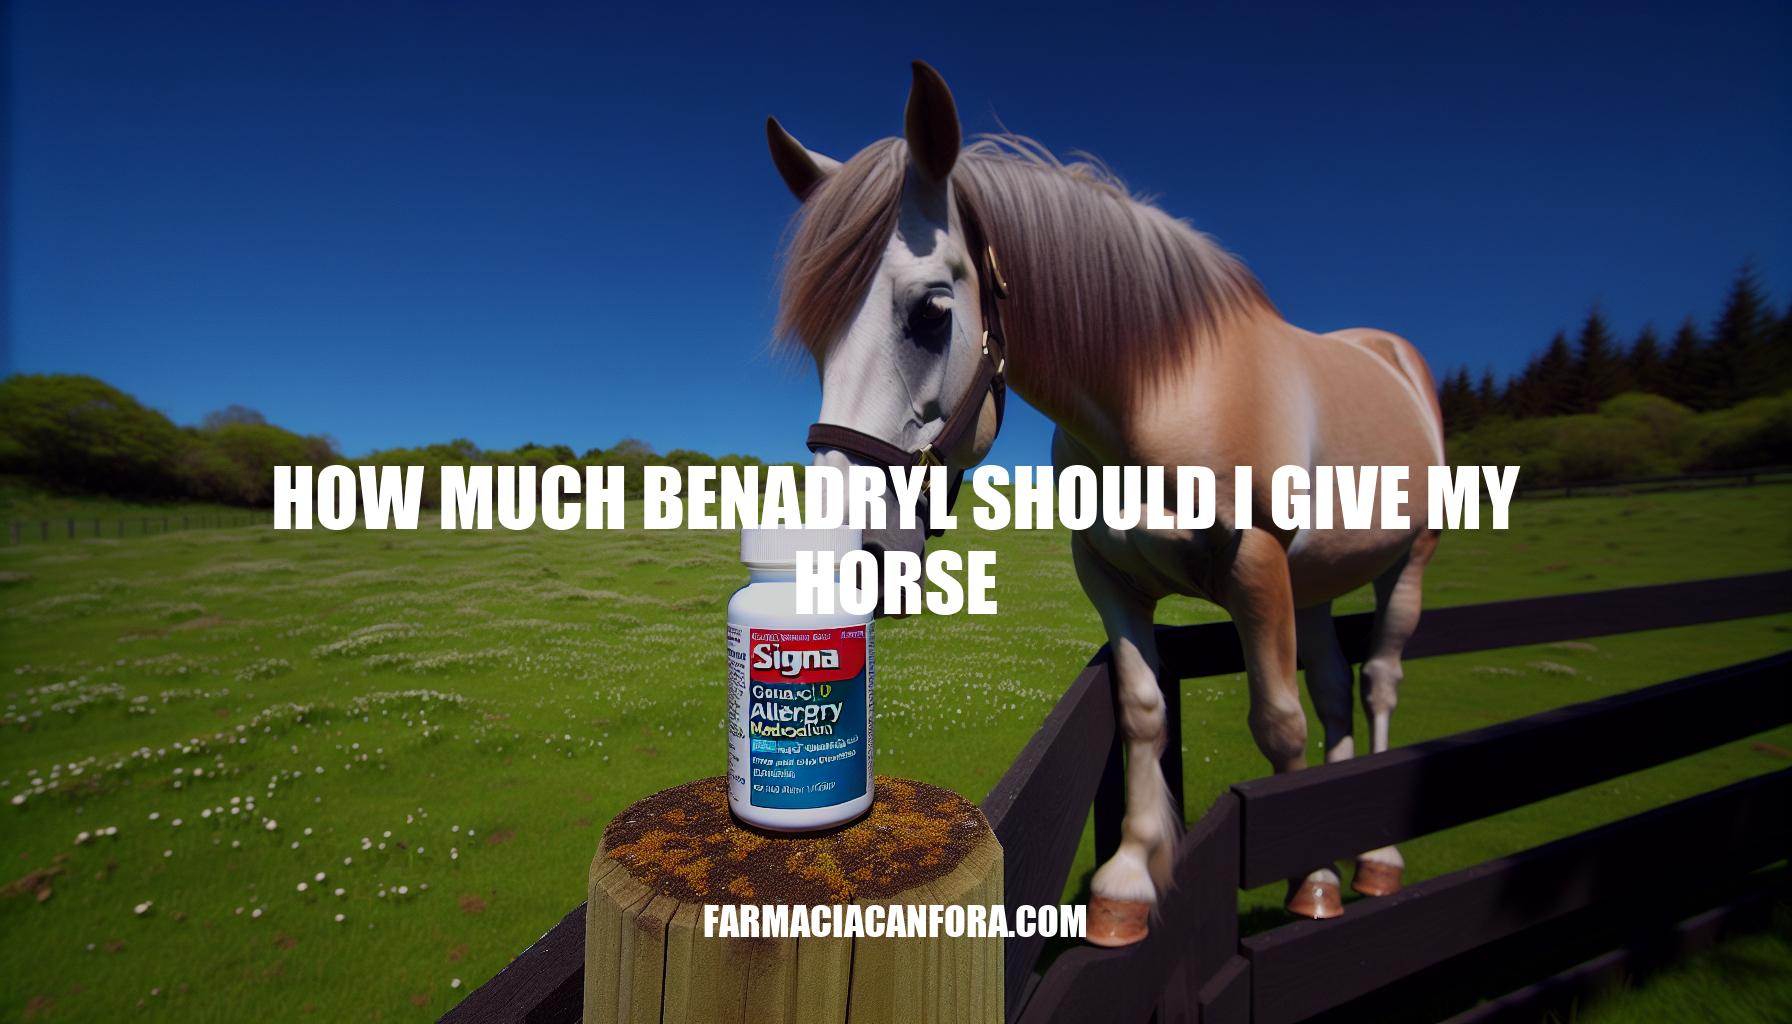 How Much Benadryl Should I Give My Horse?